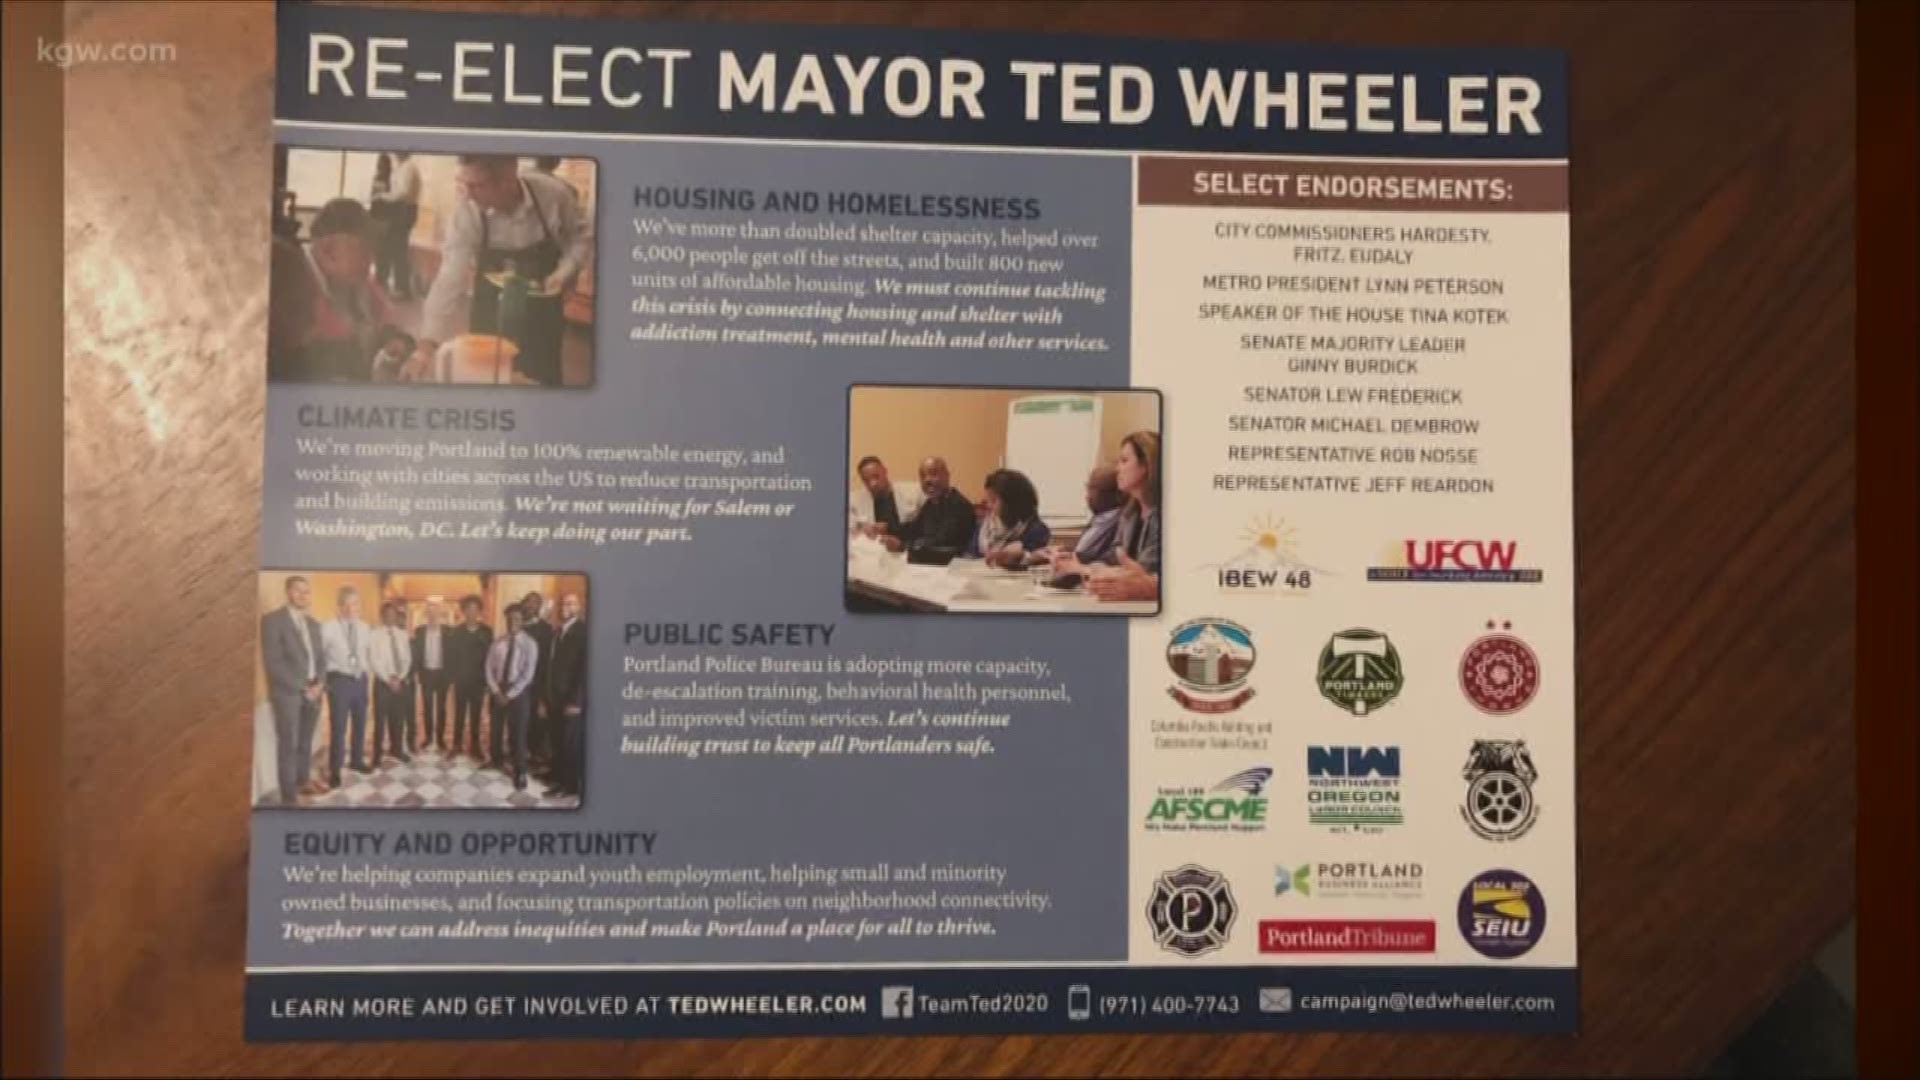 Voters are receiving a pamphlet that shows the incumbent has quite a few supporters, but at least three of those endorsements don't appear to be valid.